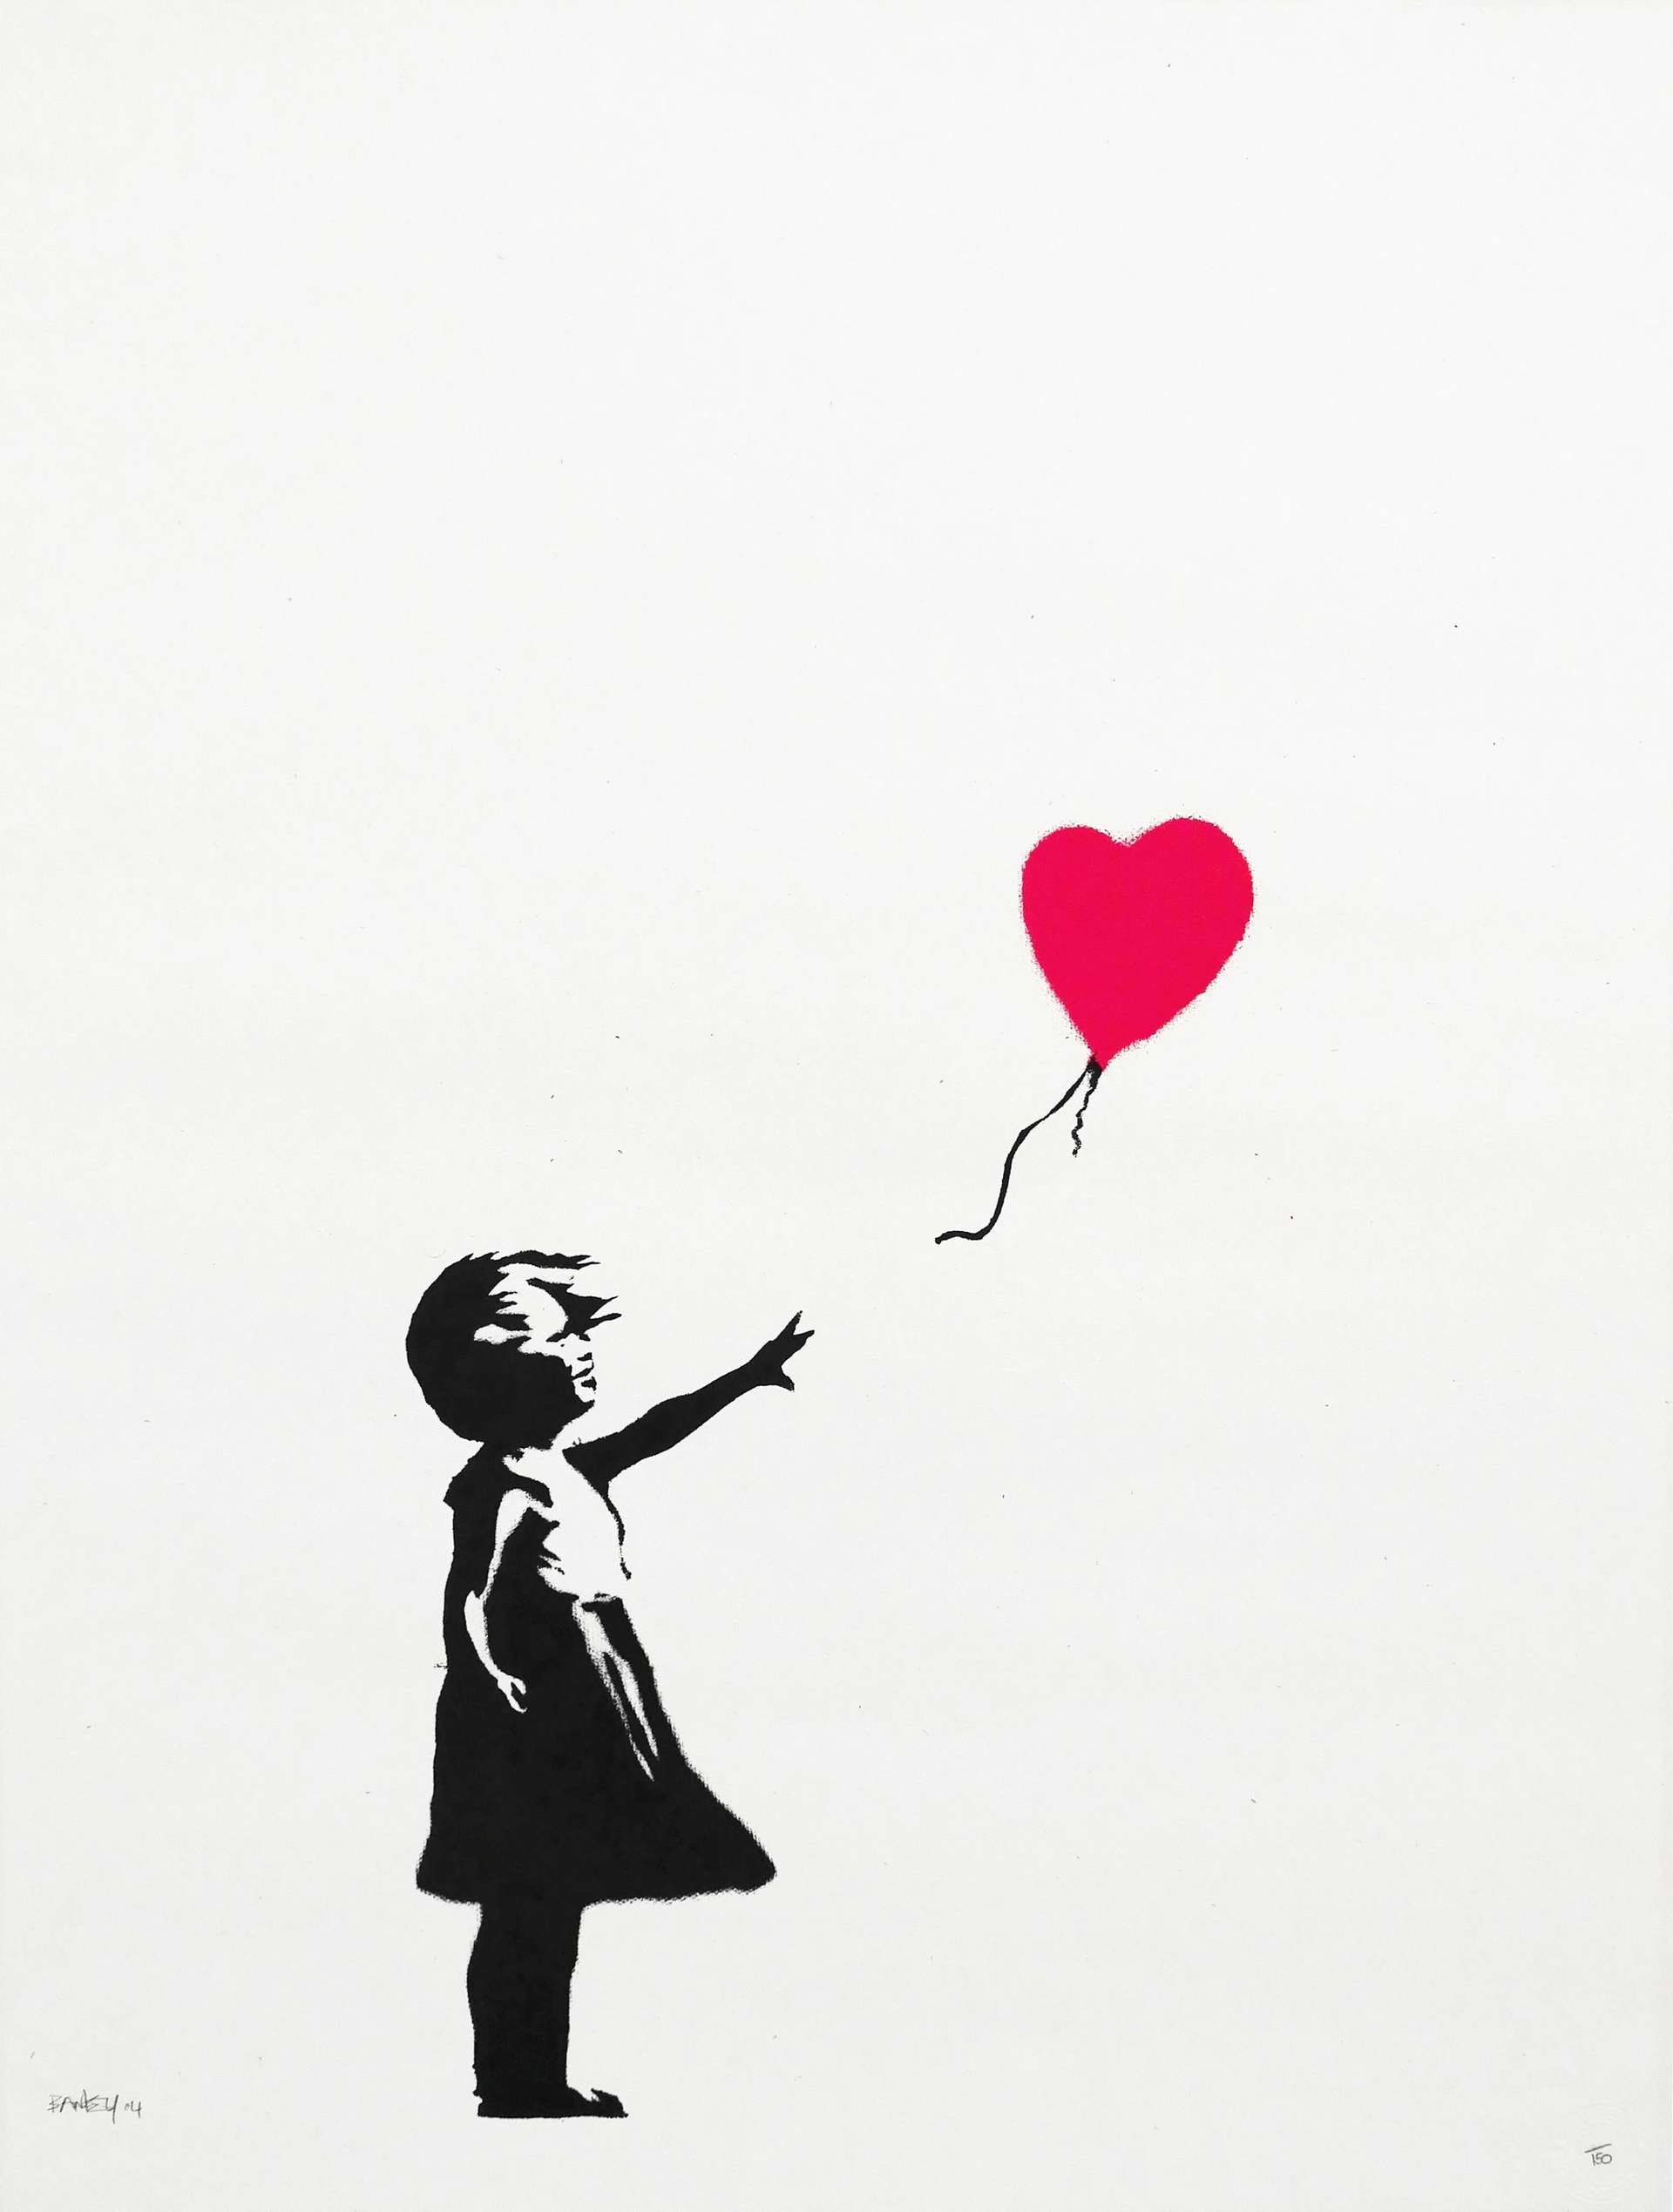 A screenprint by Banksy depicting a young girl in black paint reaching for a red heart-shaped balloon